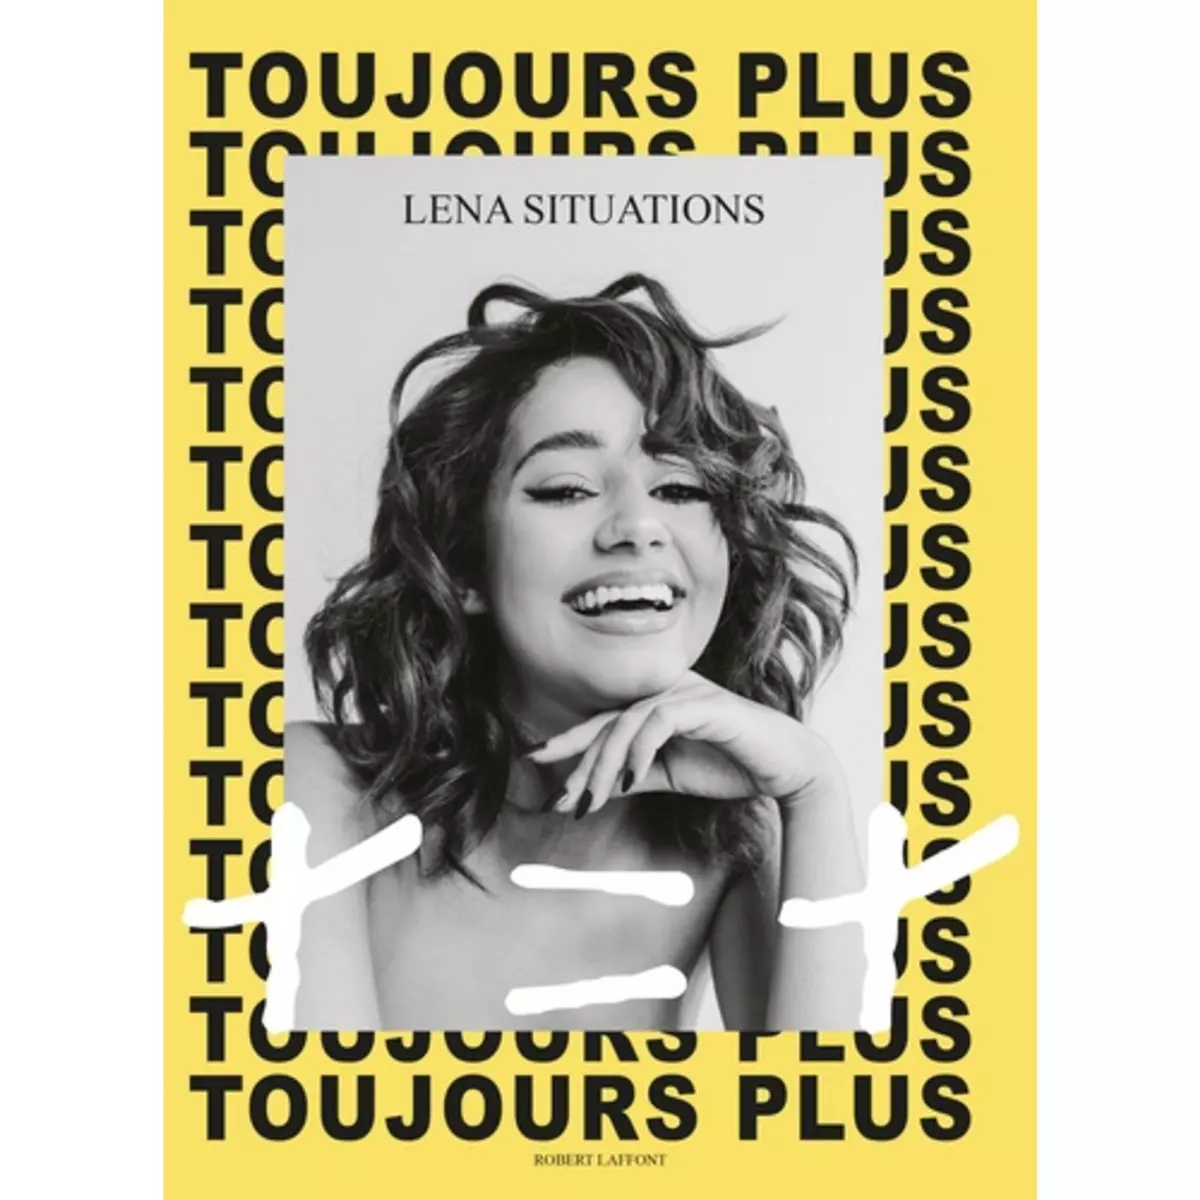  TOUJOURS PLUS. MA METHODE + = +, Lena Situations